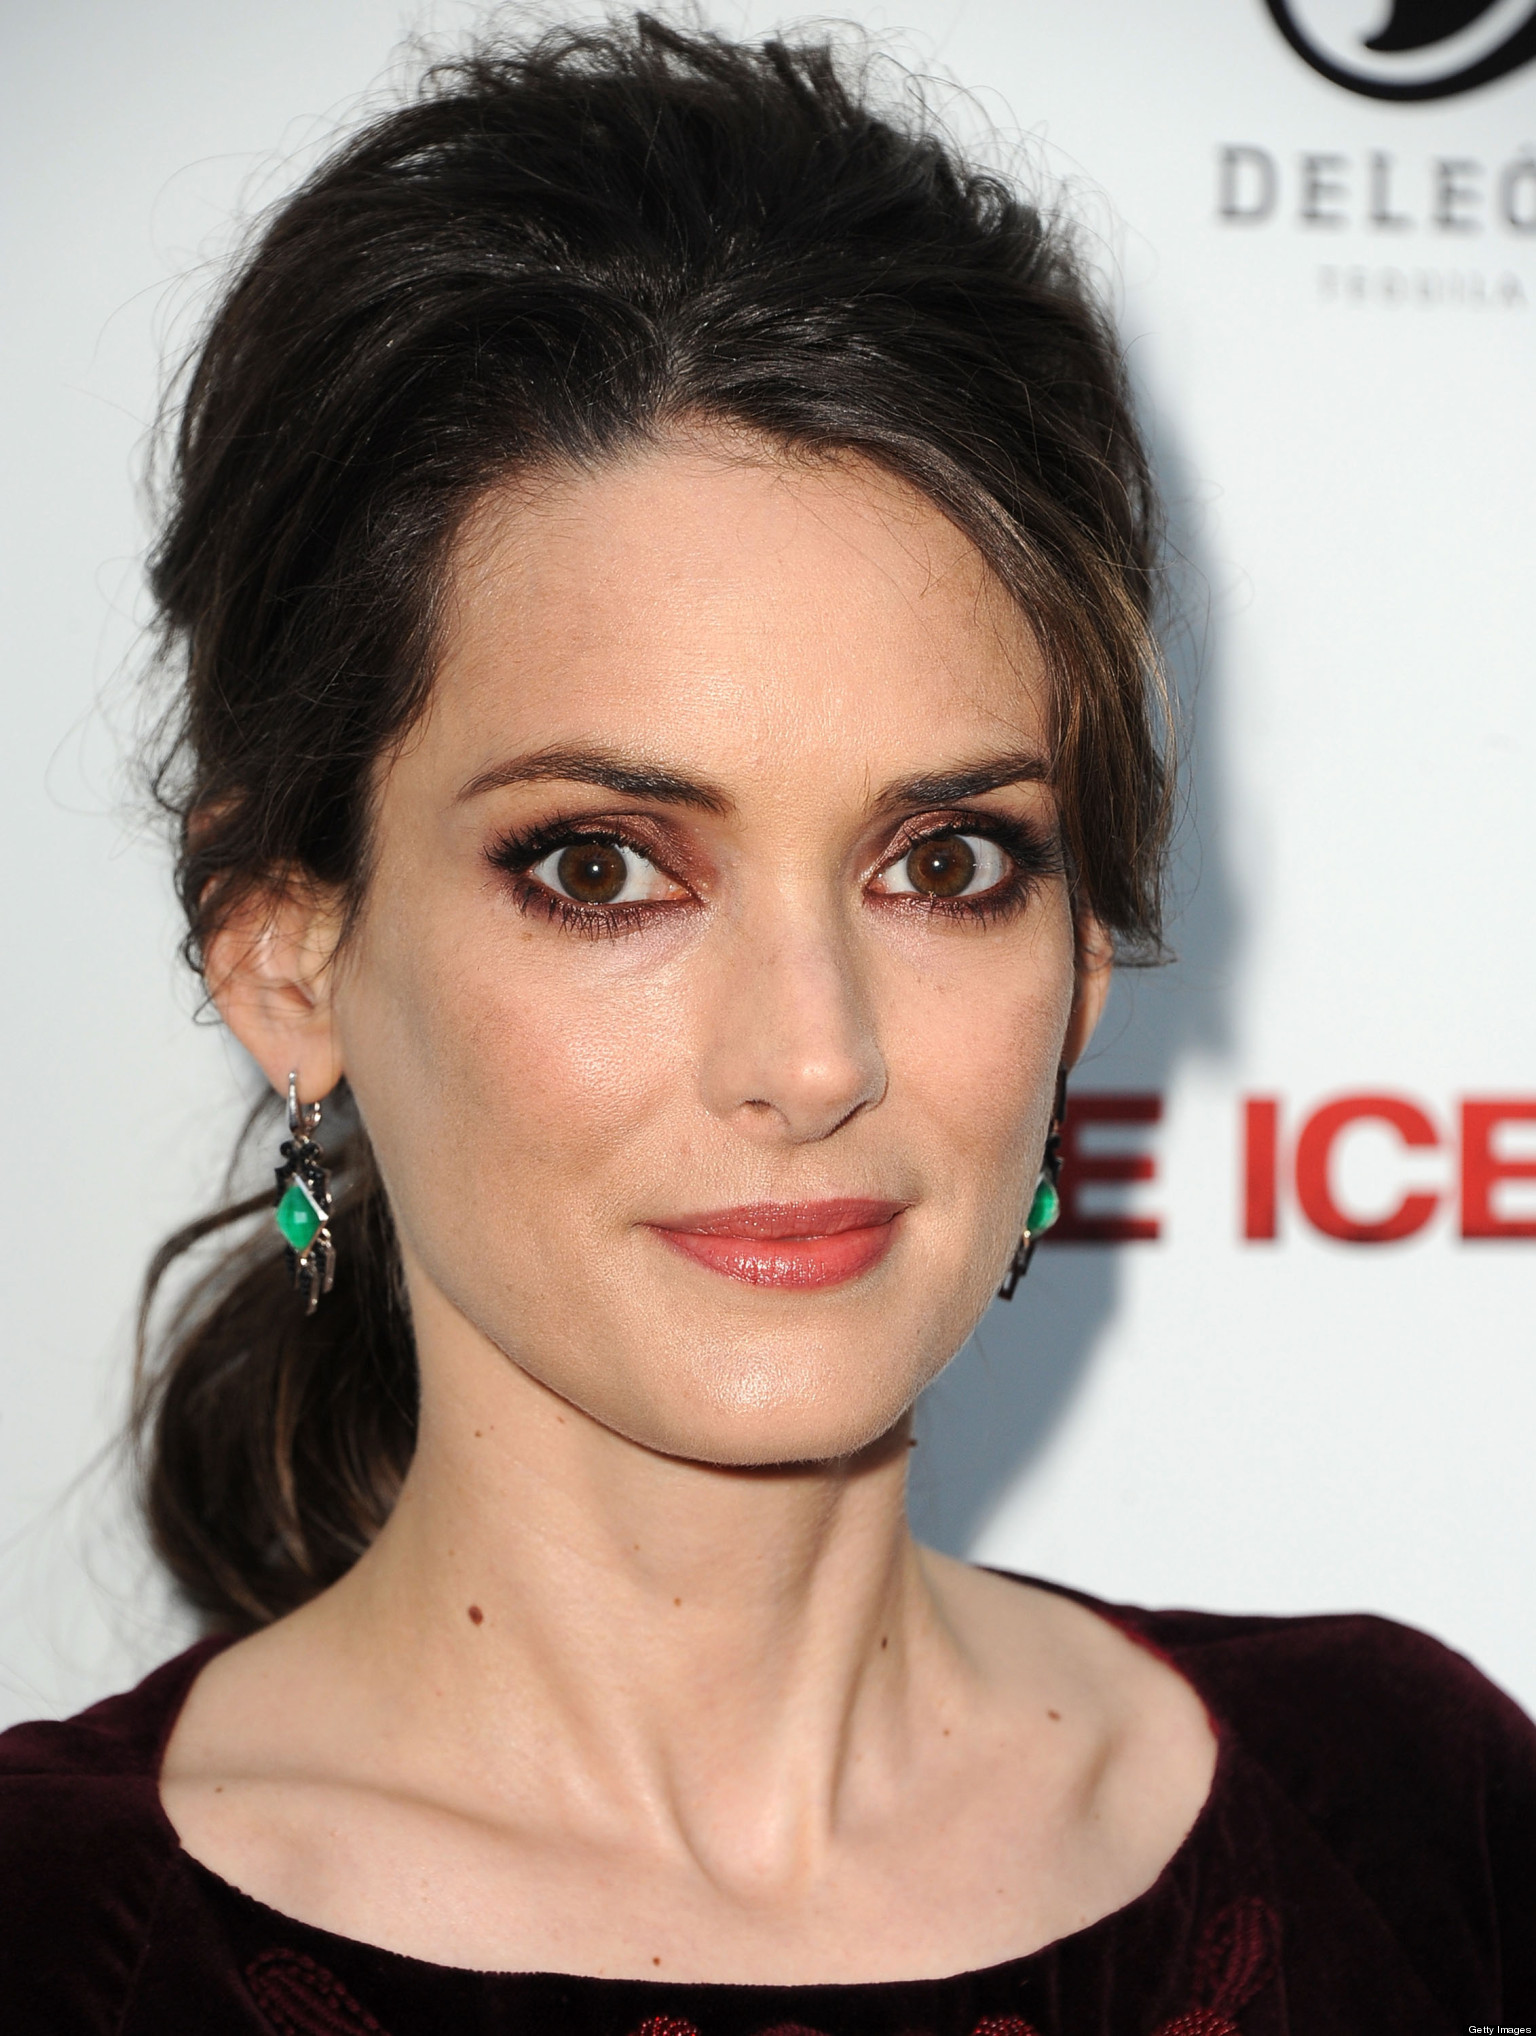 Winona Ryder:
In 2001, Winona was arrested for stealing more than $5,500 worth of Bulgari jewels and designer clothes from Saks Fifth Avenue in Beverly Hills, California. When police caught her, she gave a statement that her director suggested her to shoplift to prepare for her upcoming movie. In 2002, she was sentenced to three years' probation and $3,700 in fines. She remained on probation until December 2005.